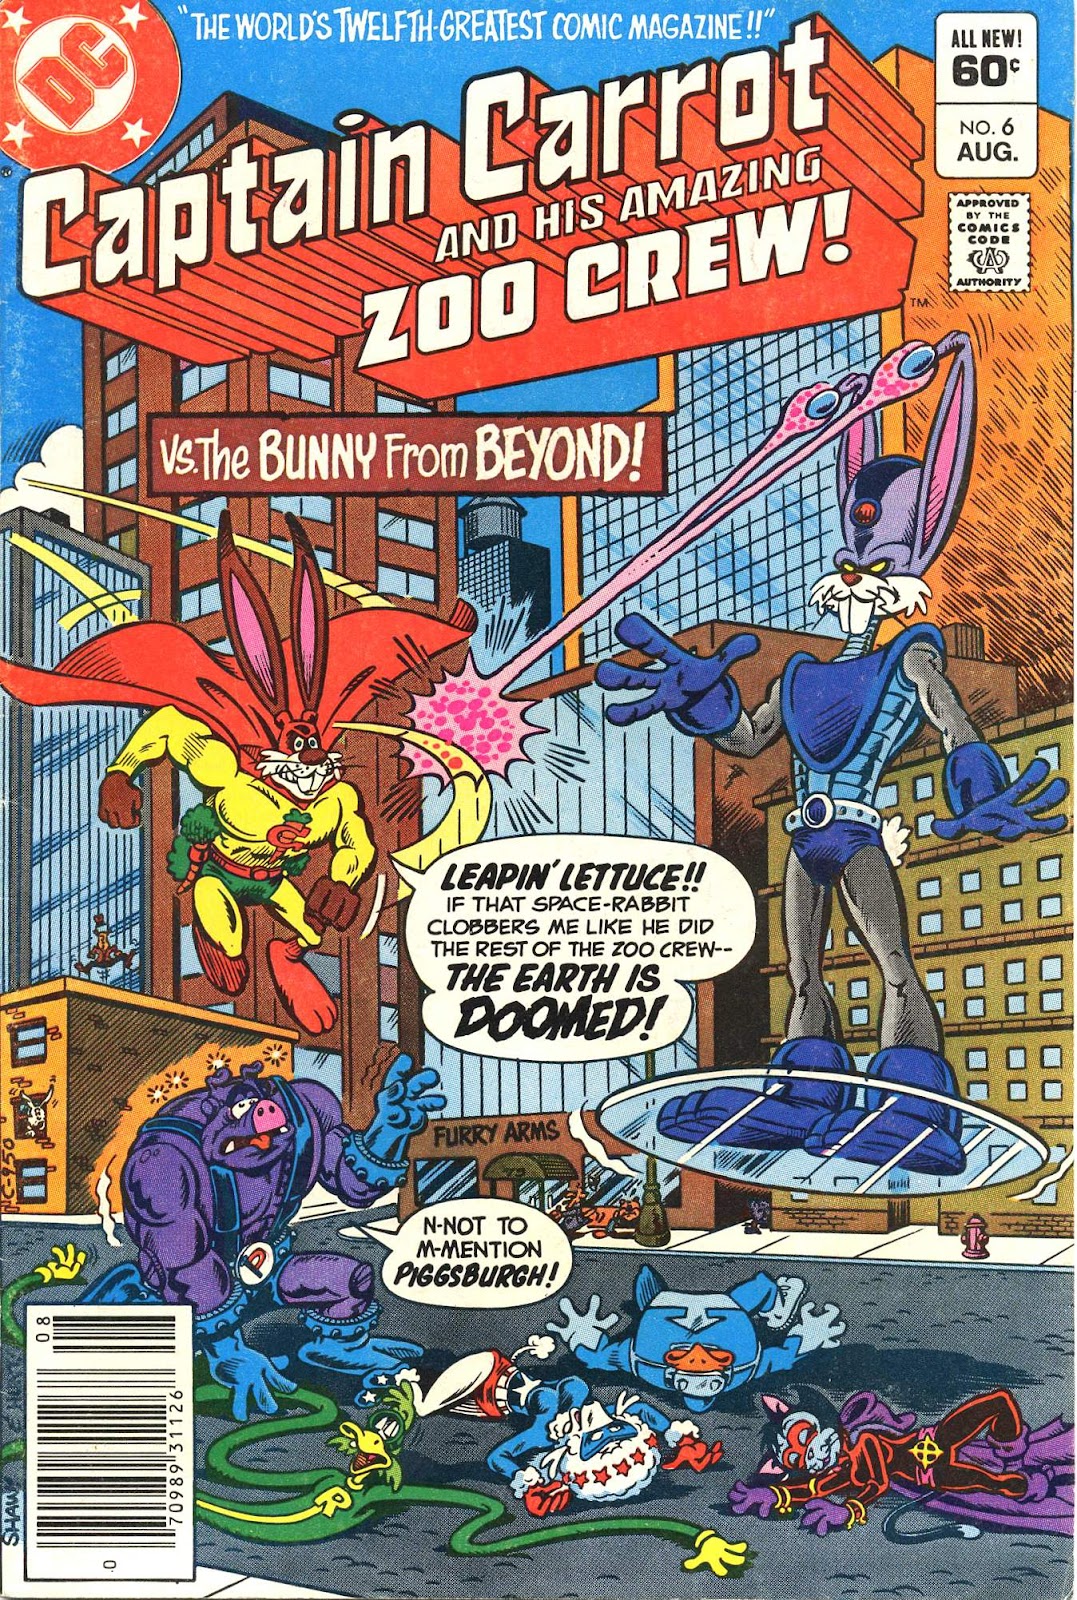 Captain Carrot and His Amazing Zoo Crew! issue 6 - Page 1